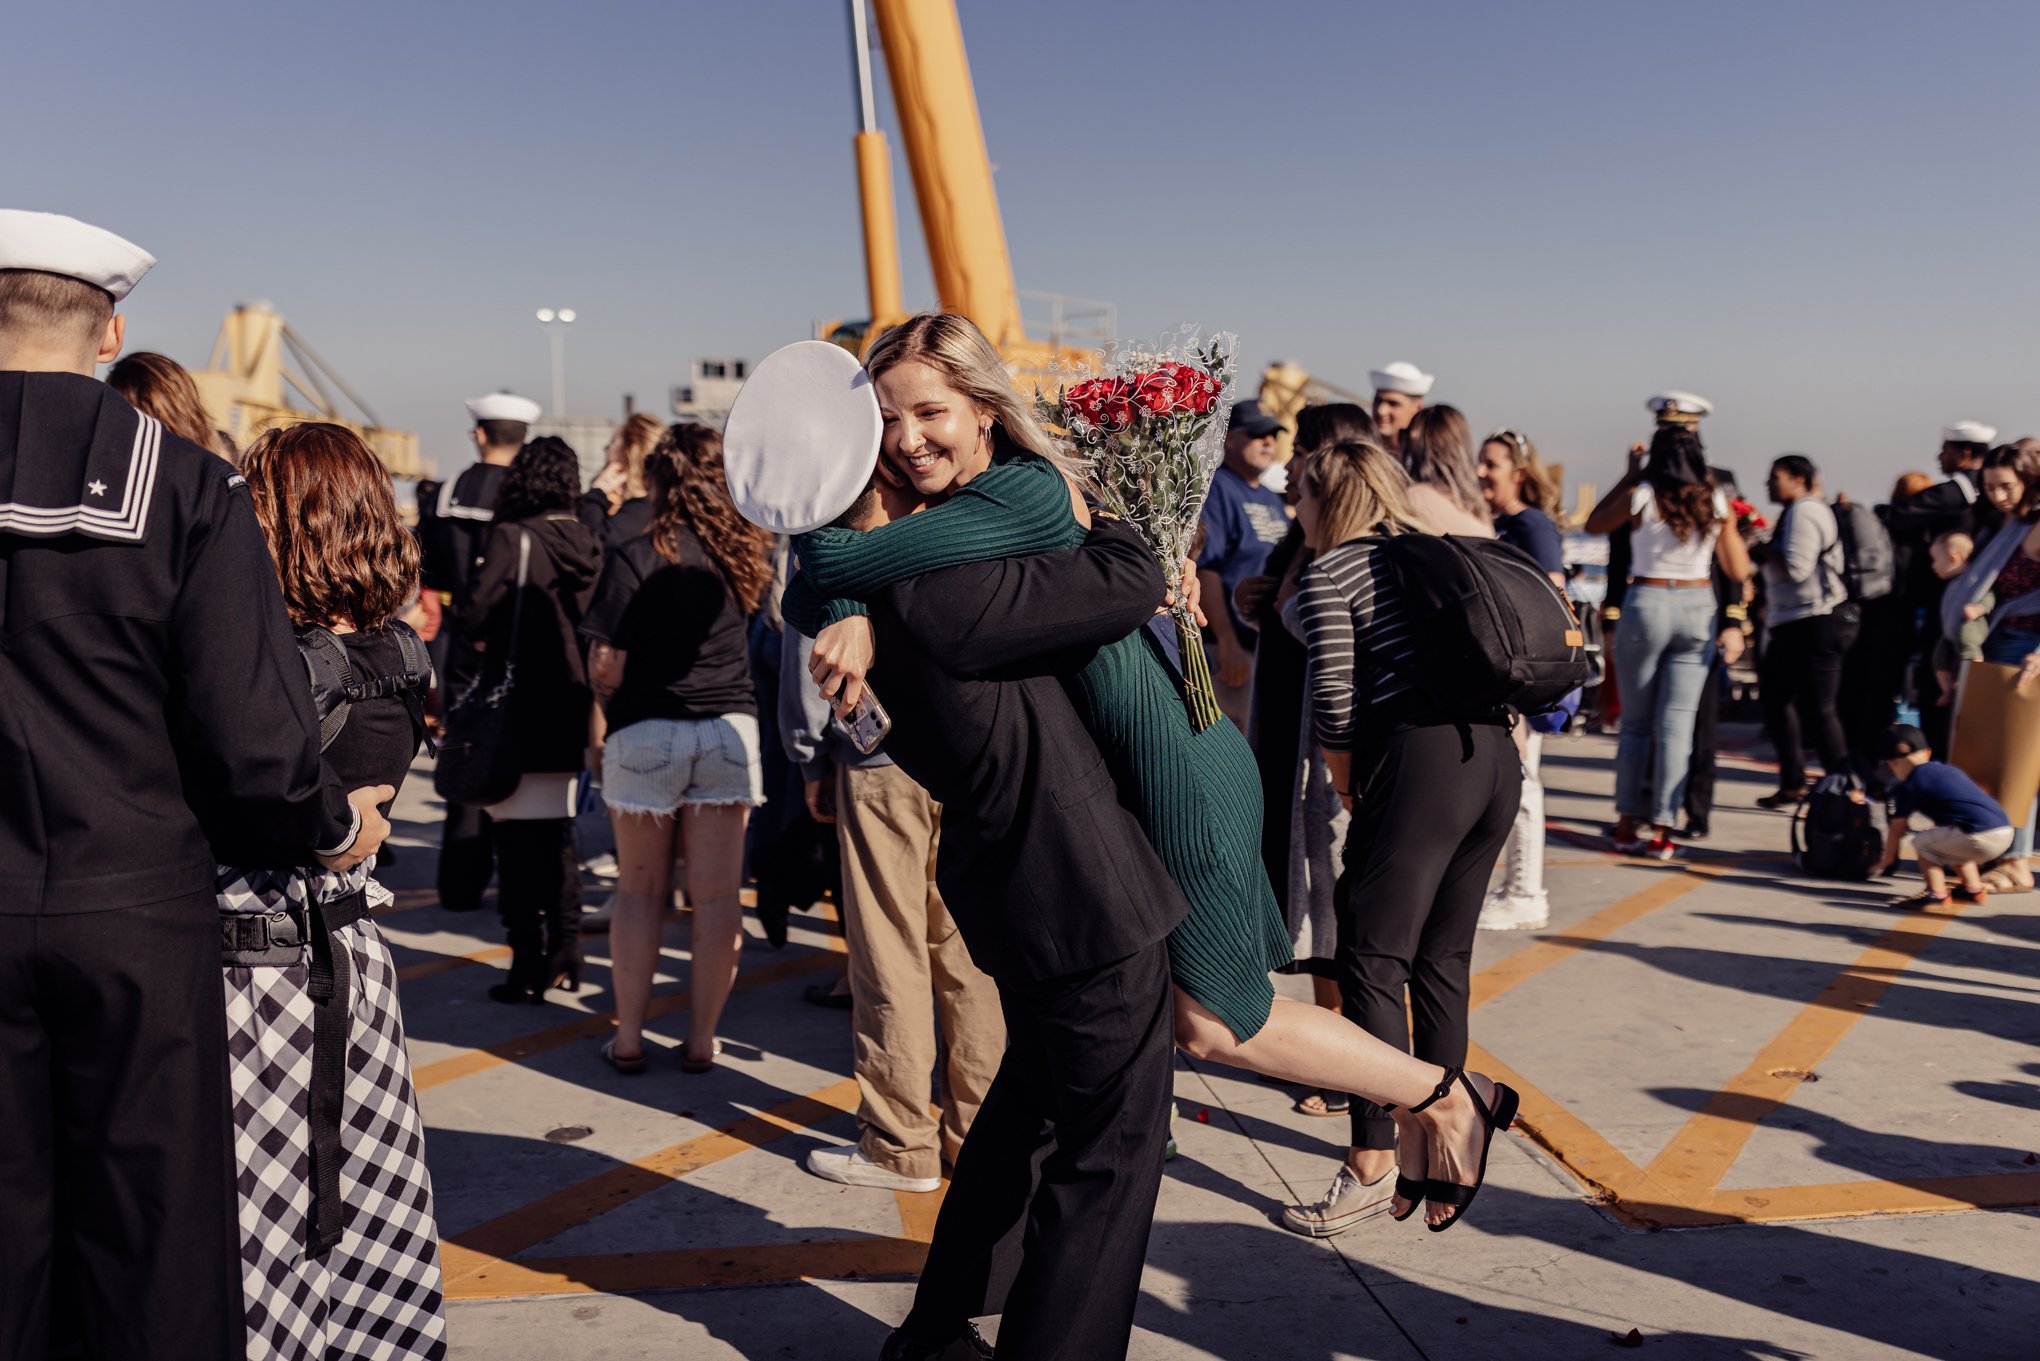 Wife swept off of feet at navy Homecoming point loma ca